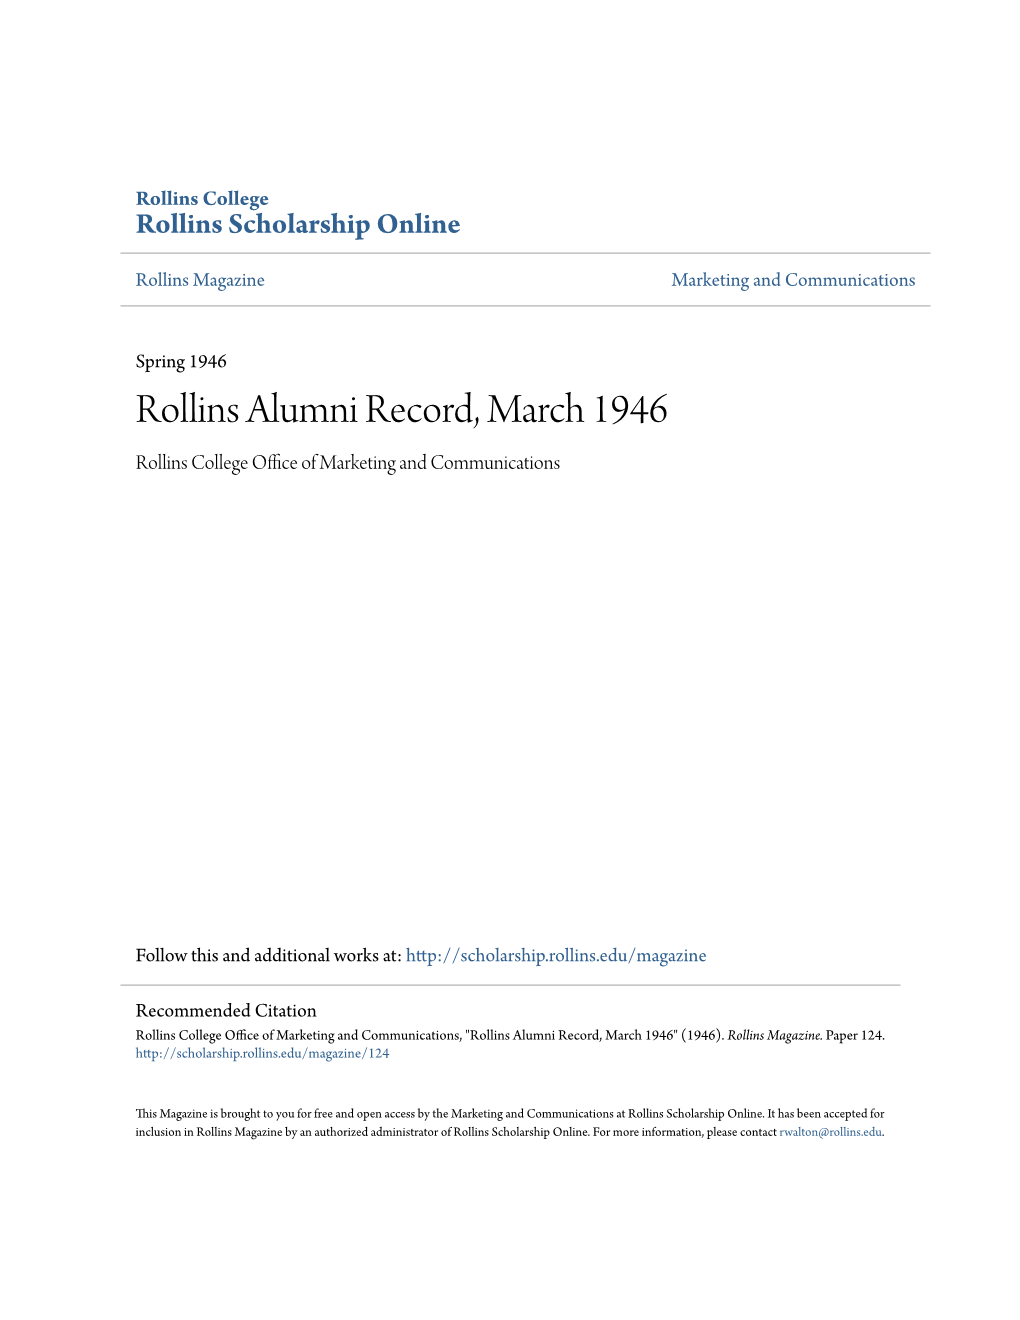 Rollins Alumni Record, March 1946 Rollins College Office Ofa M Rketing and Communications